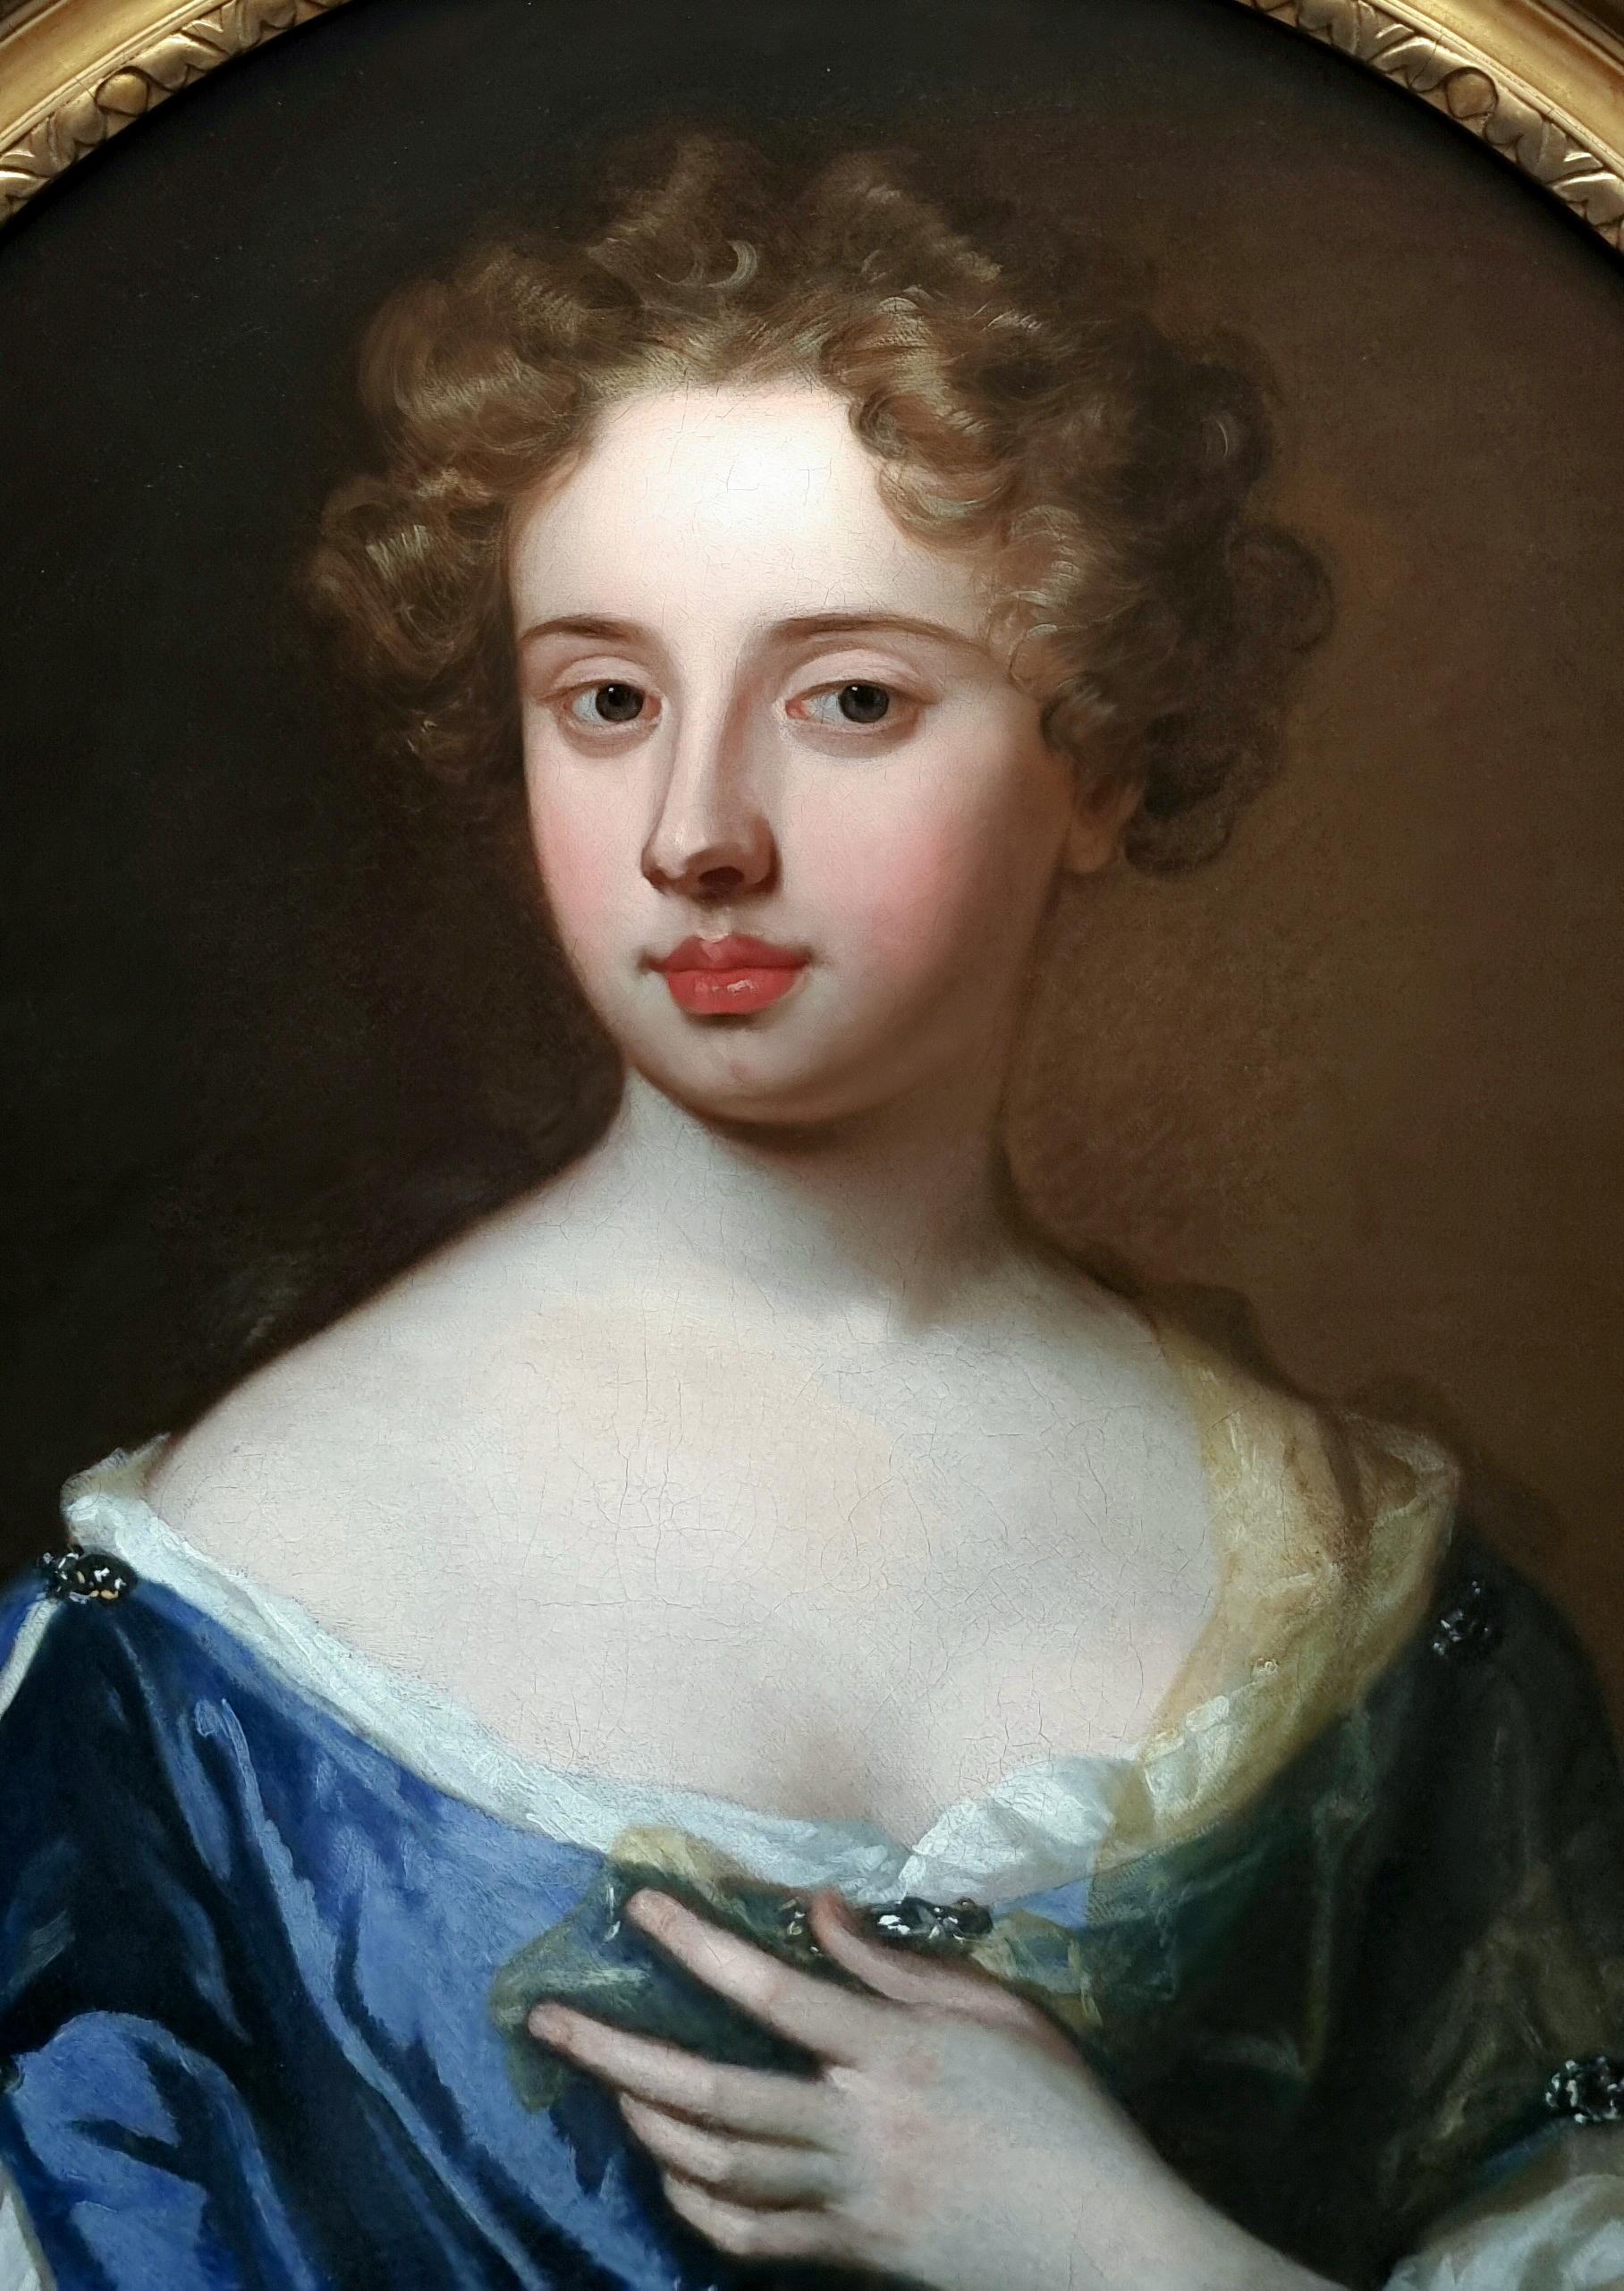 Portrait of a Lady in a Blue Gown Holding a Sheer Scarf c.1675-85, Oil on canvas - Old Masters Painting by Kneller Godfrey